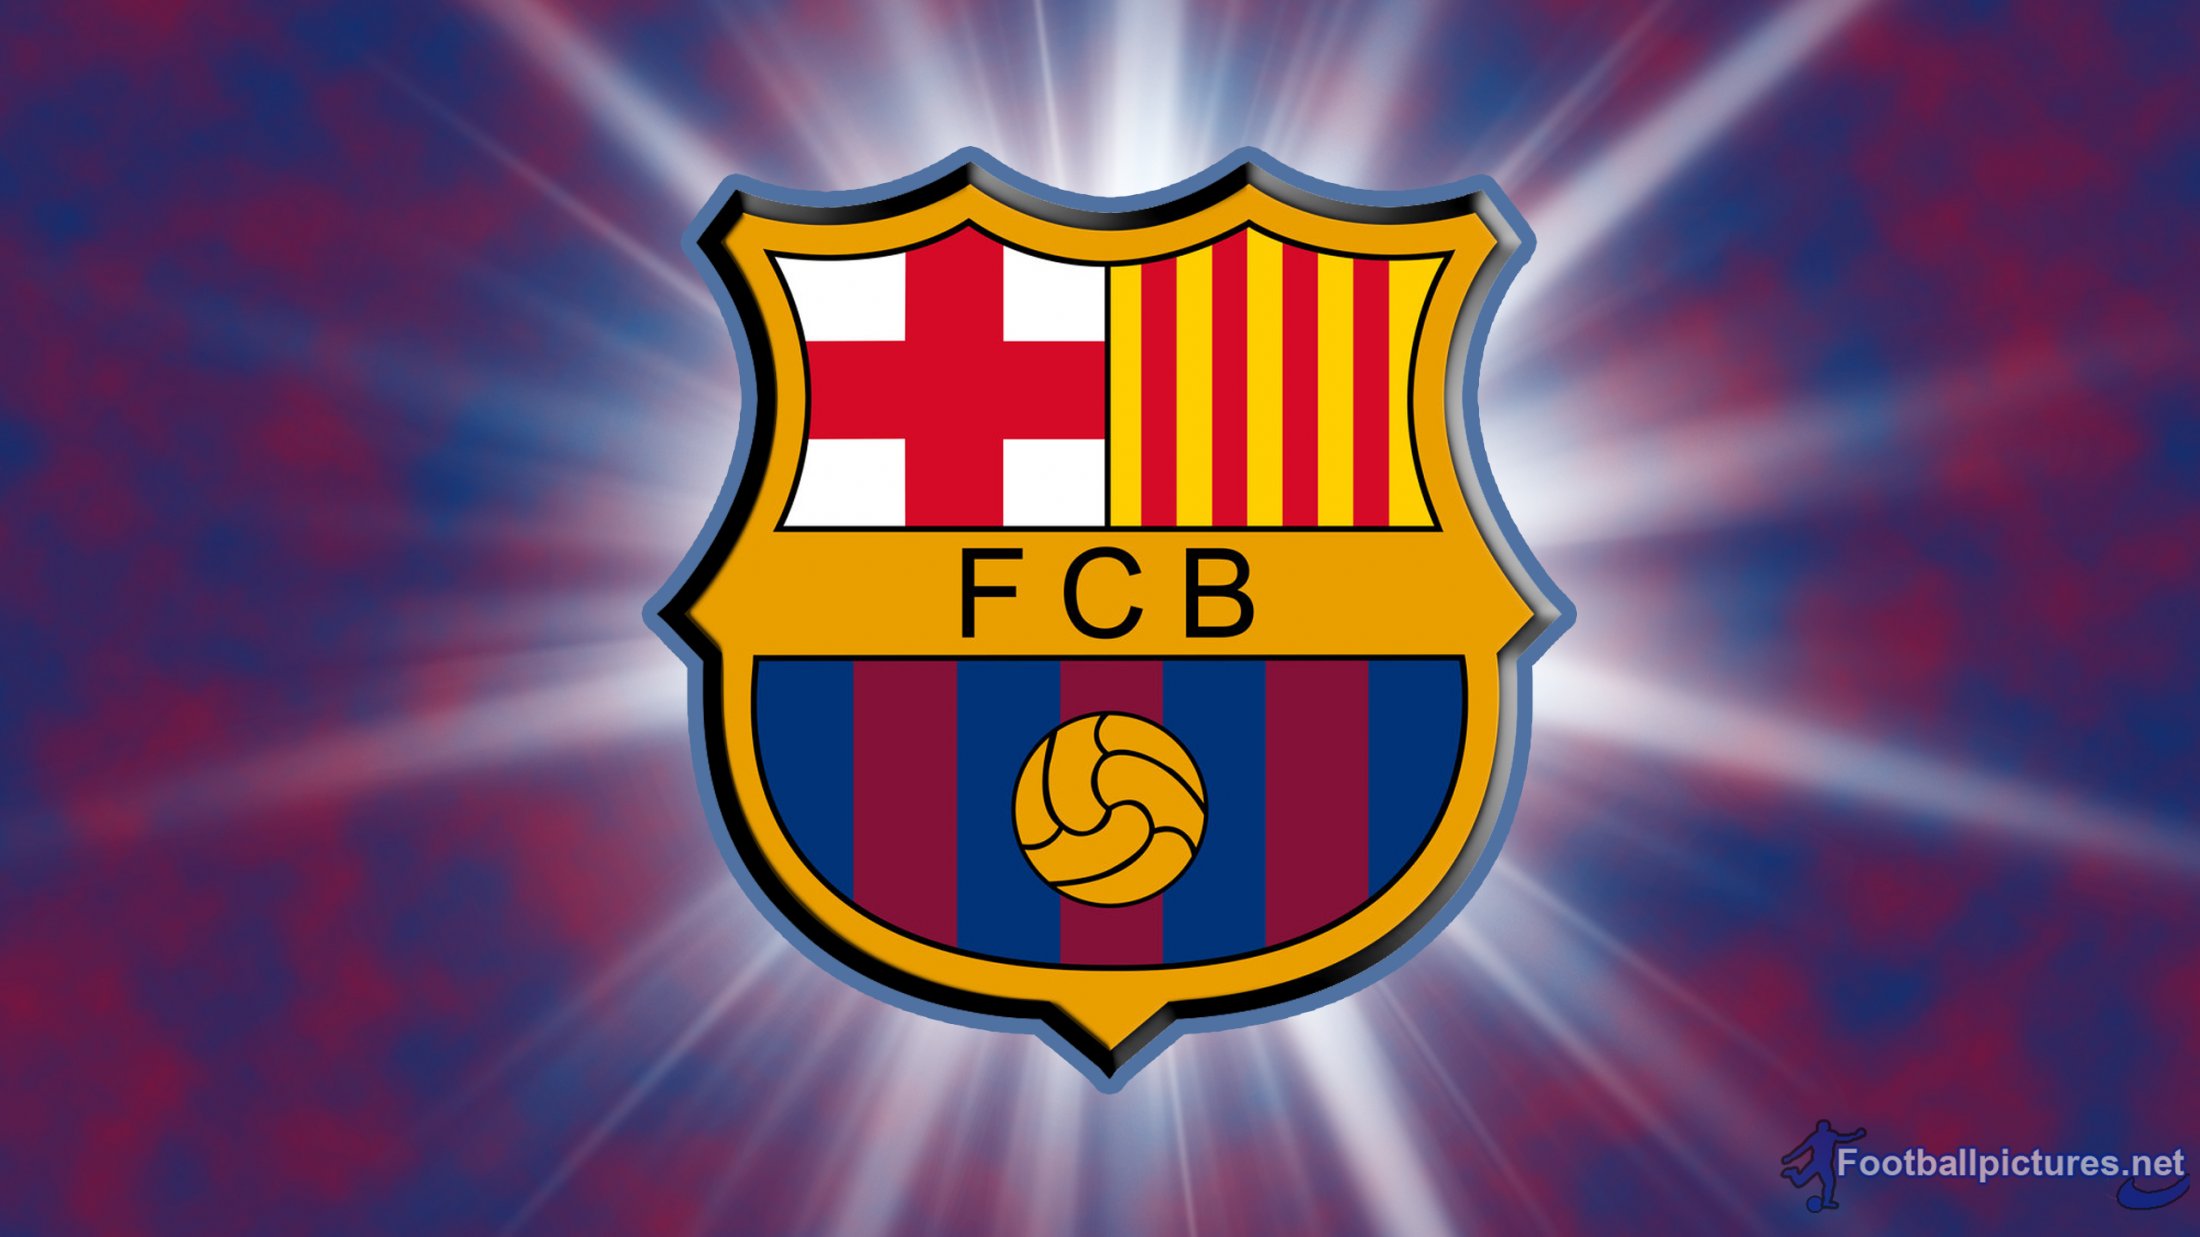 Best Barcelona Fc Wallpaper Football Pictures And Photos